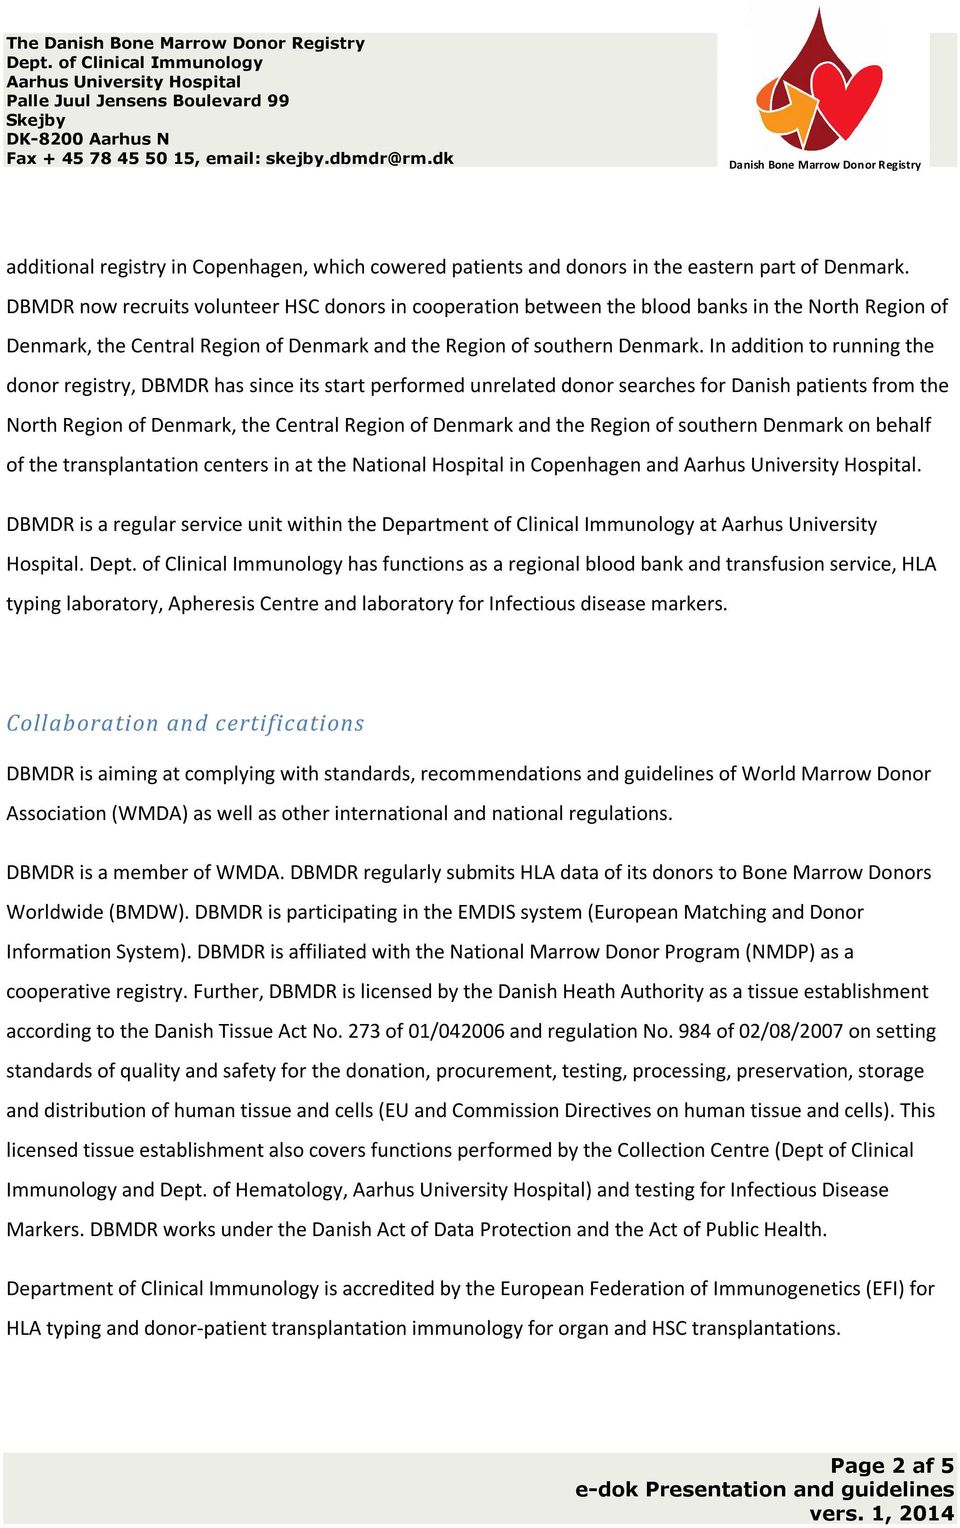 In addition to running the donor registry, DBMDR has since its start performed unrelated donor searches for Danish patients from the North Region of Denmark, the Central Region of Denmark and the